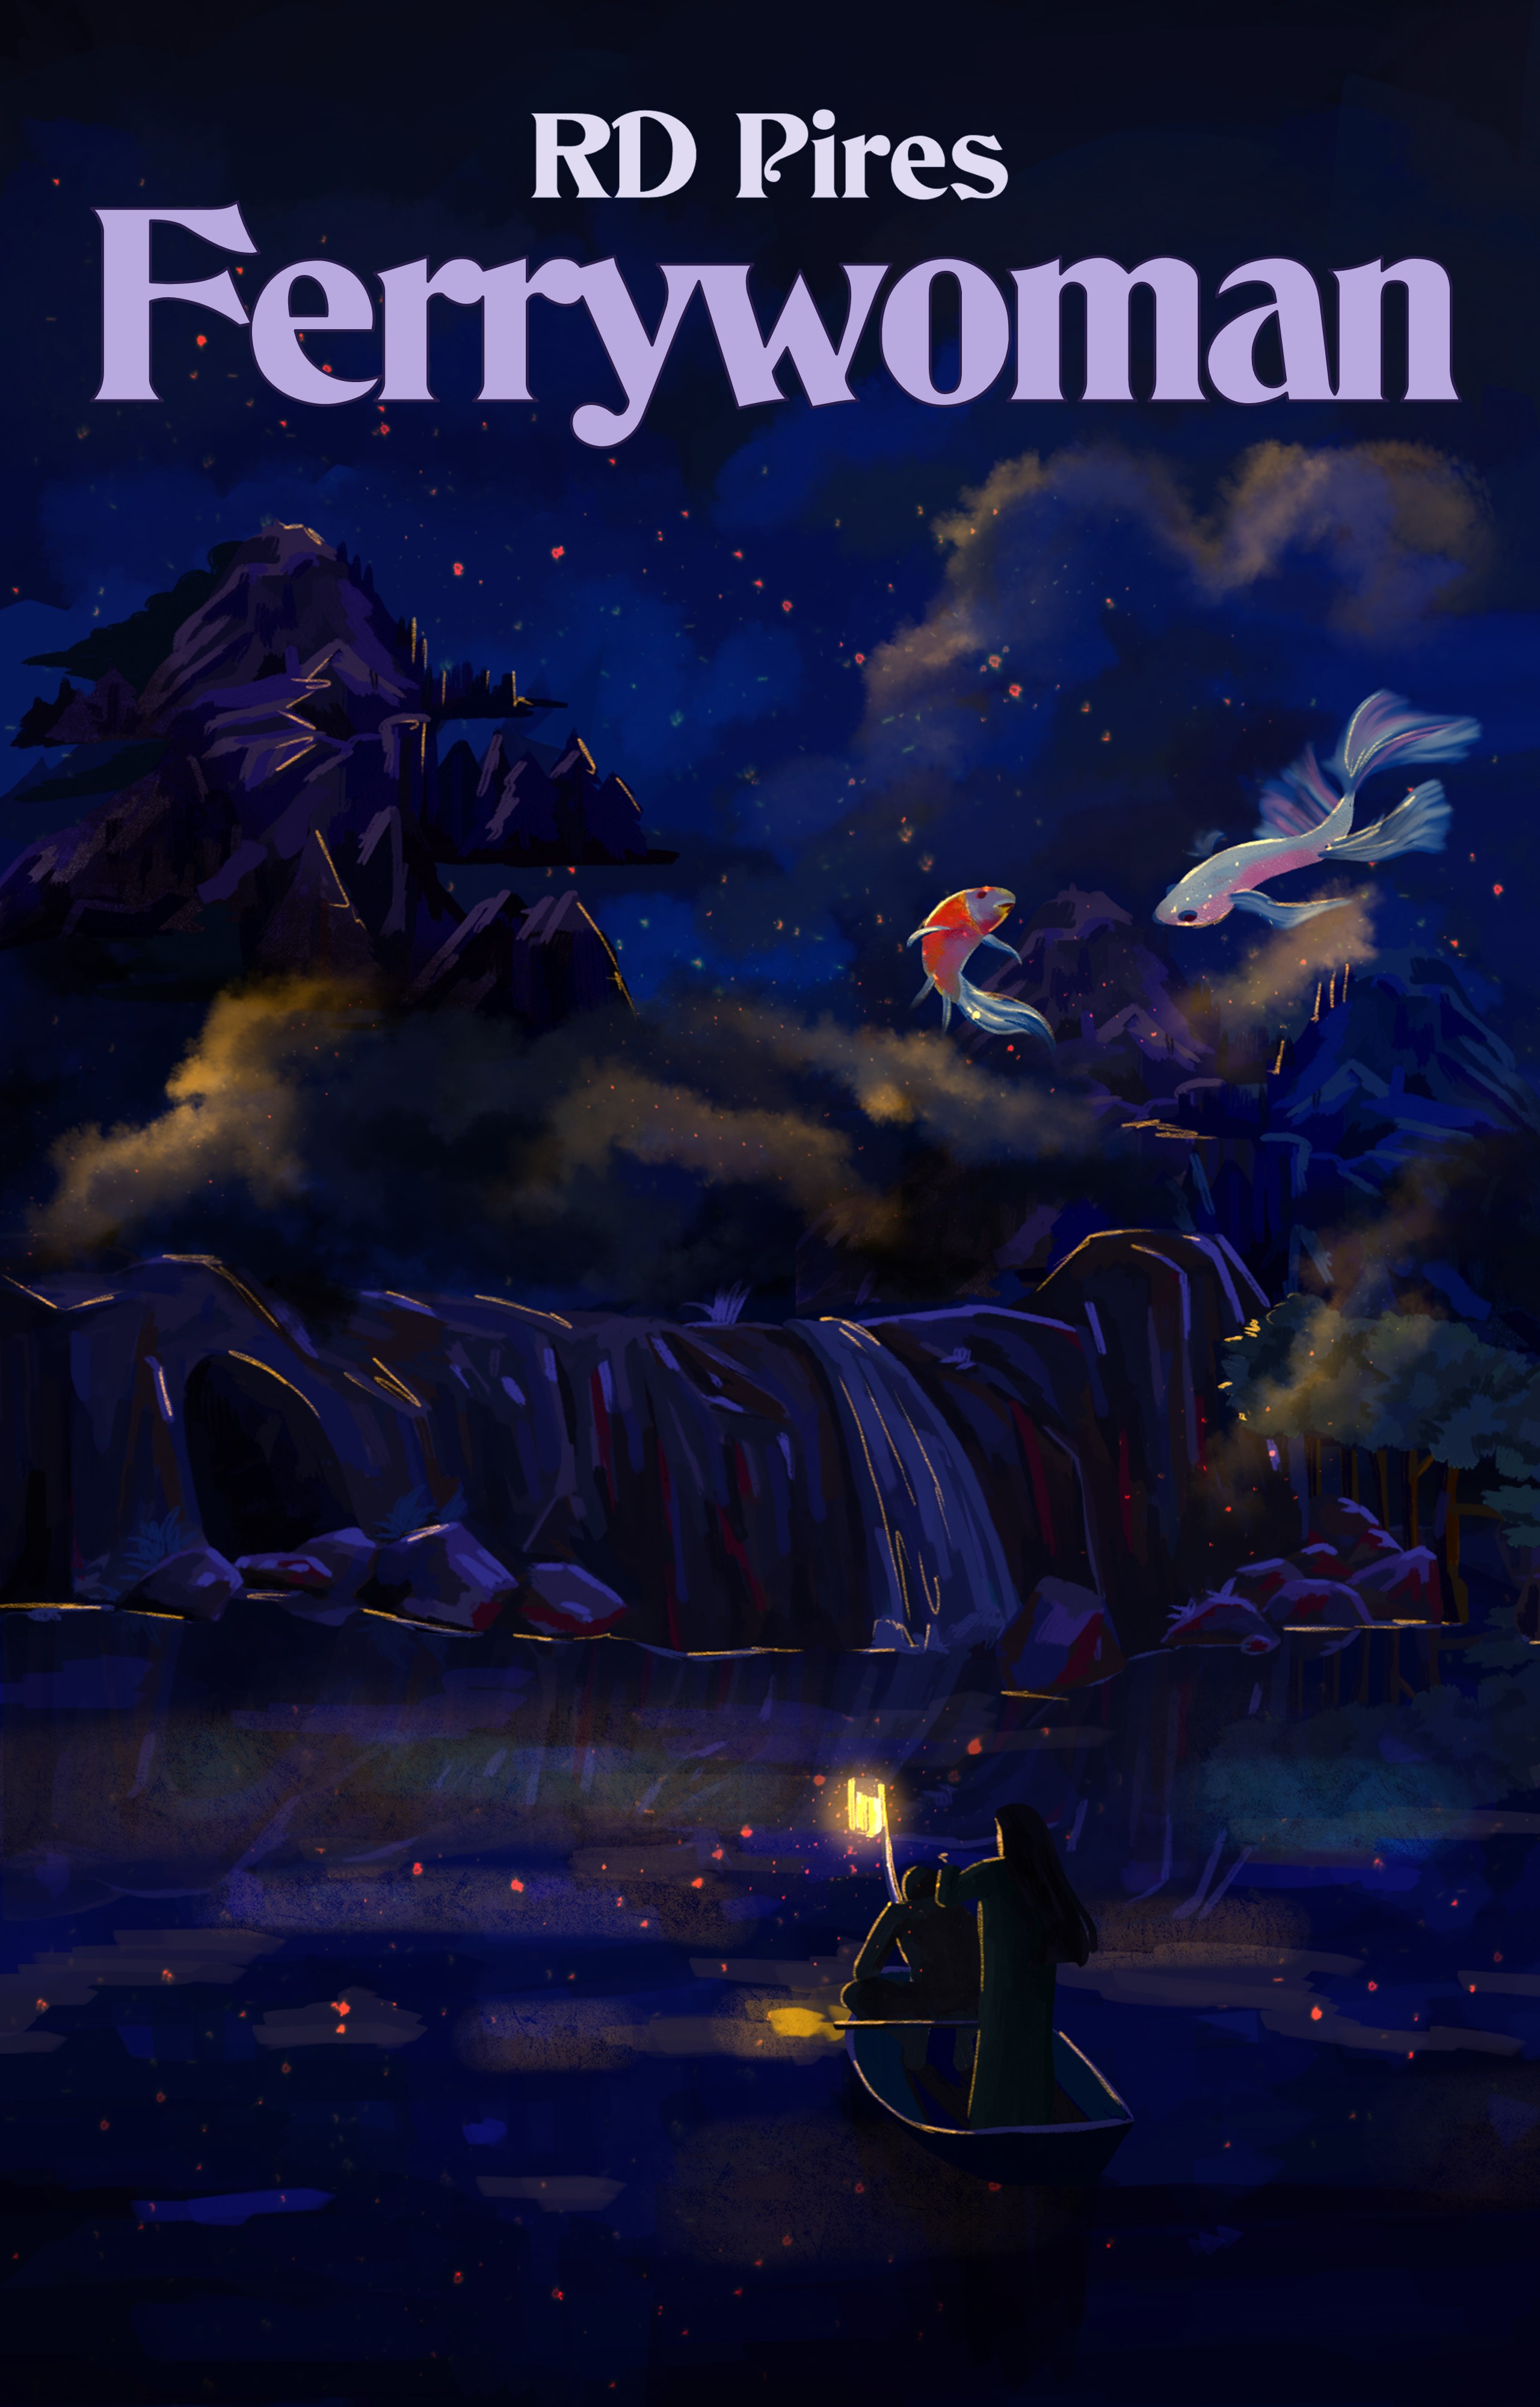 A small boat sails on a dark sea with two obscured sailors aboard and a glowing, orange lantern. They are sailing toward a dark cliffside with two visible giant koi fish flying in the air.